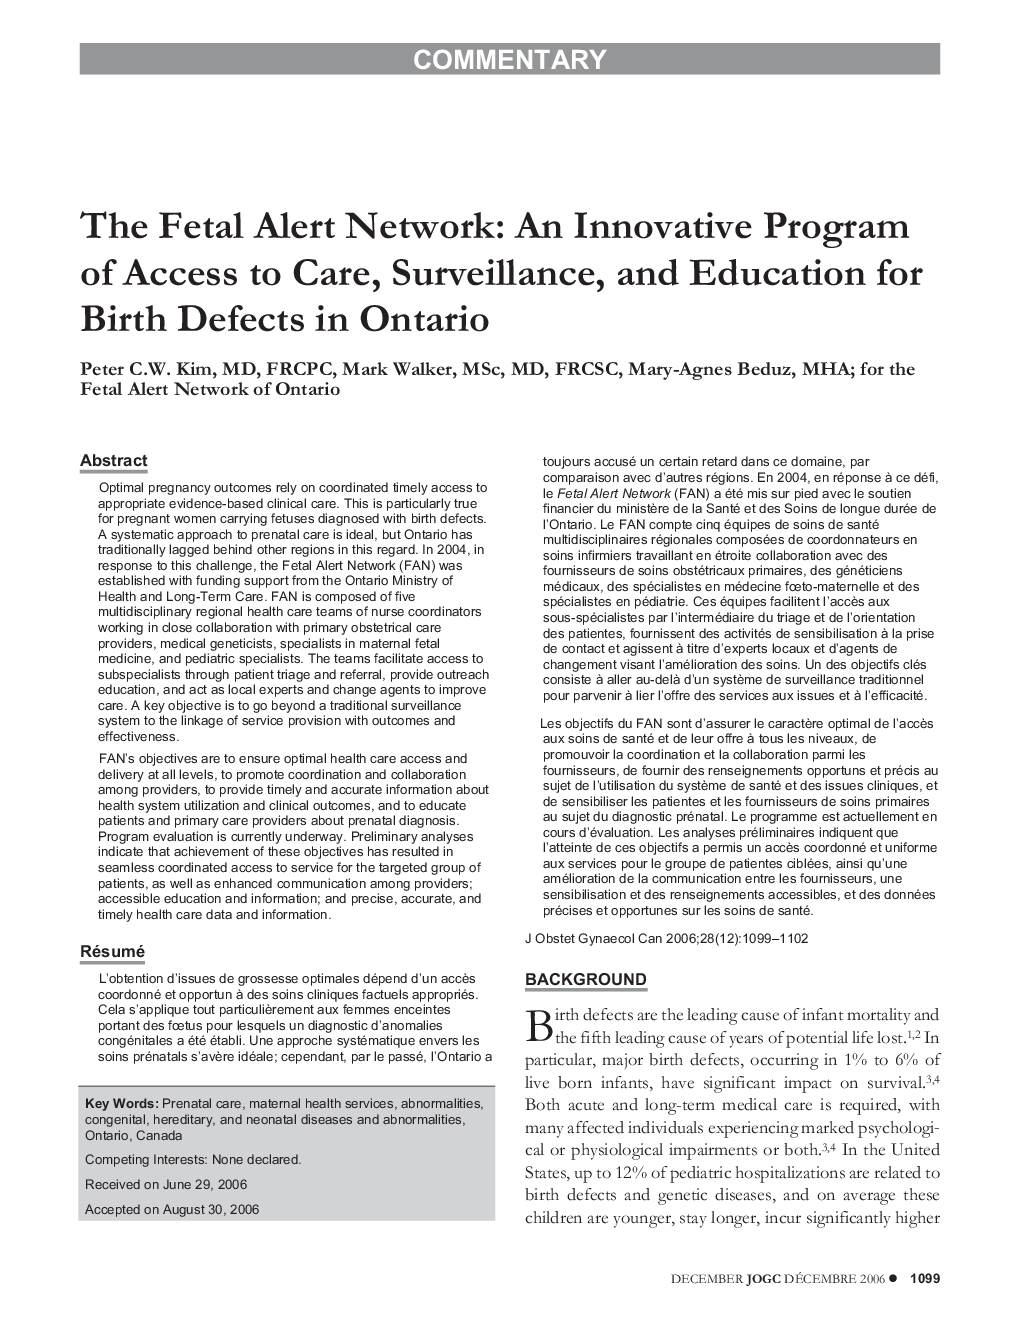 The Fetal Alert Network: An Innovative Program of Access to Care,Surveillance, and Education for Birth Defects in Ontario